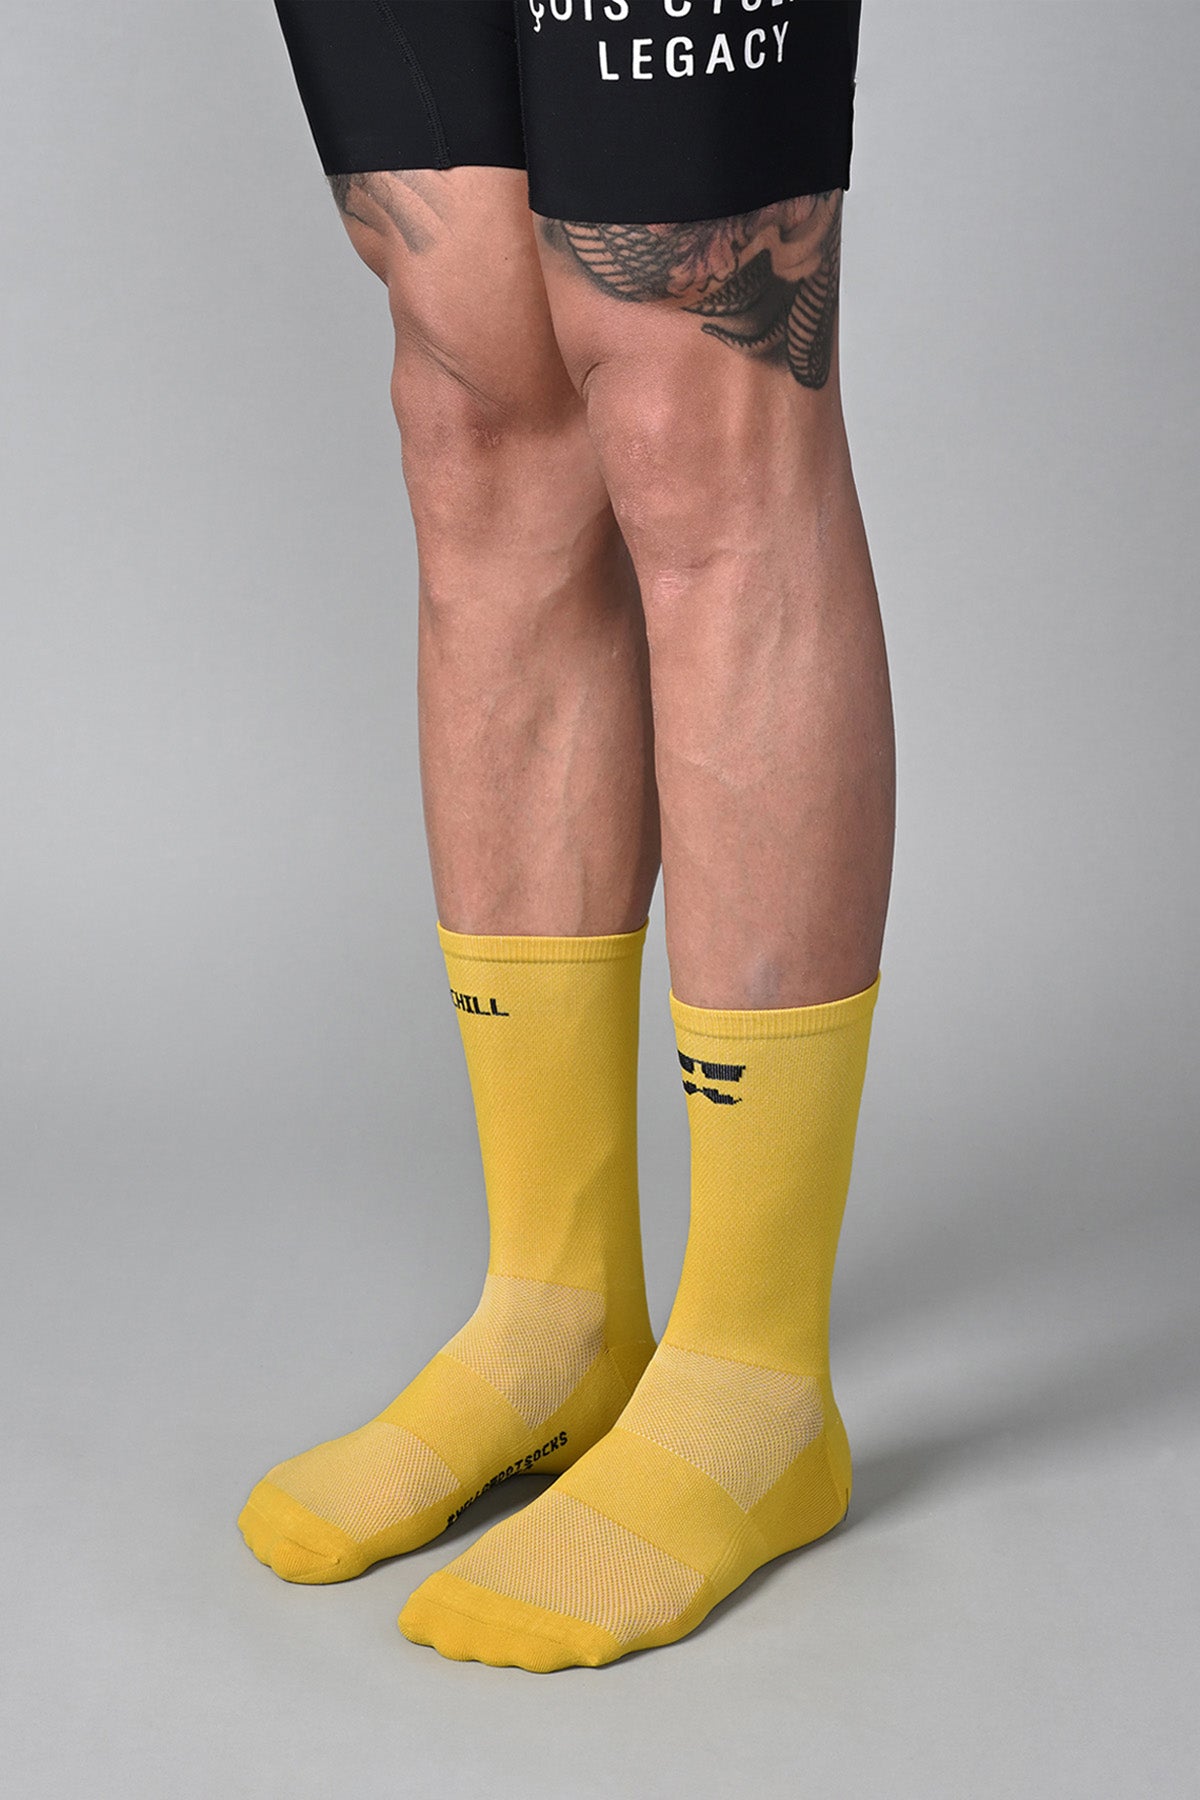 CHILL BRO - MUSTARD YELLOW FRONT SIDE | BEST CYCLING SOCKS